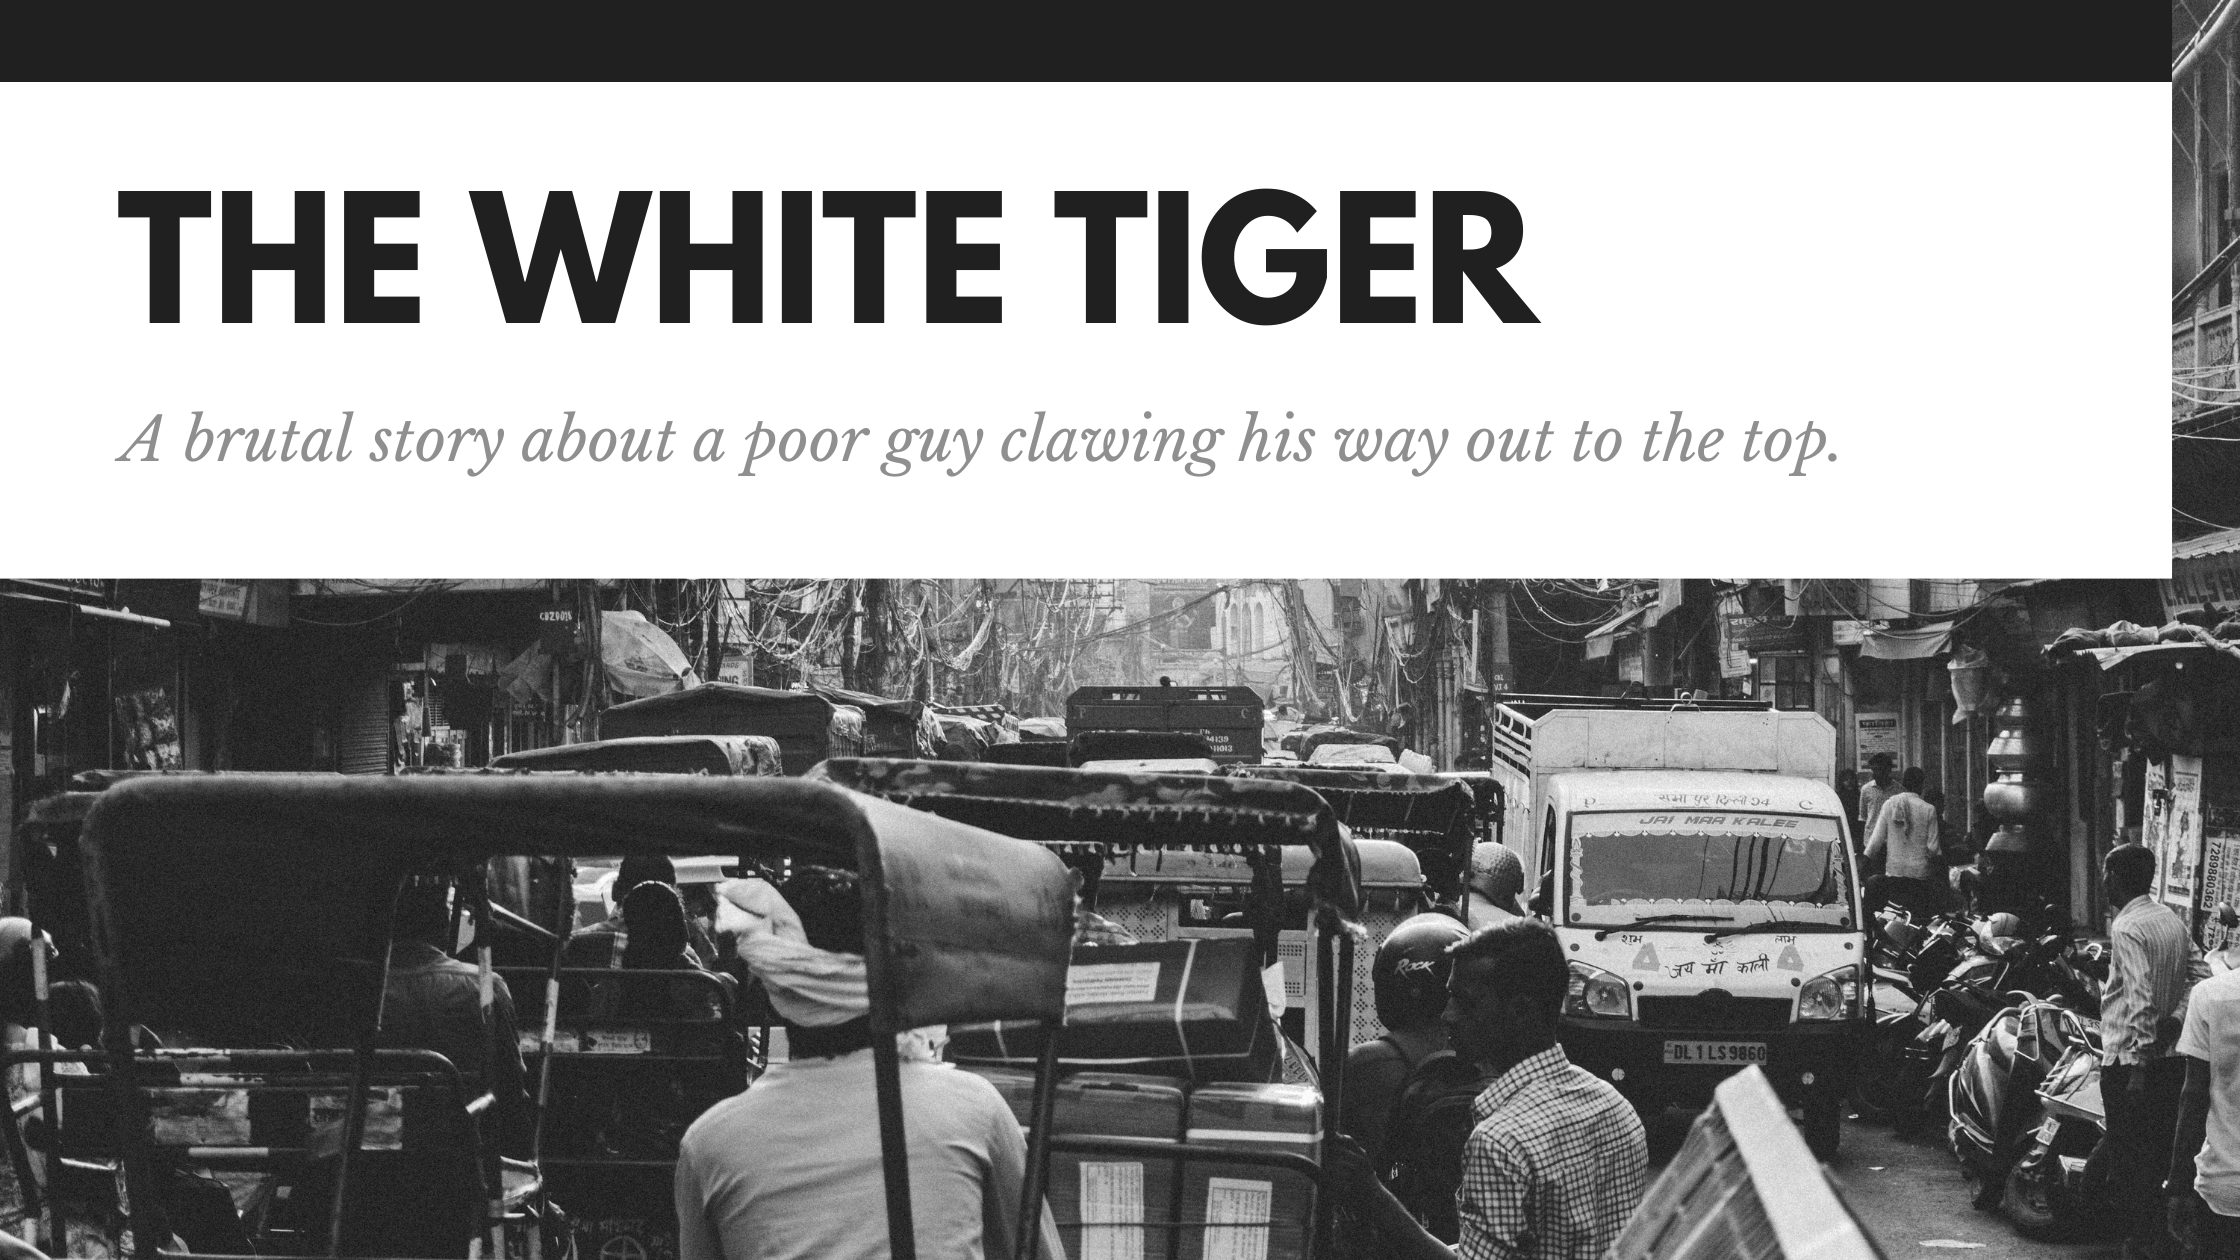 The White Tiger: A brutal story about a poor guy clawing his way out to the top.